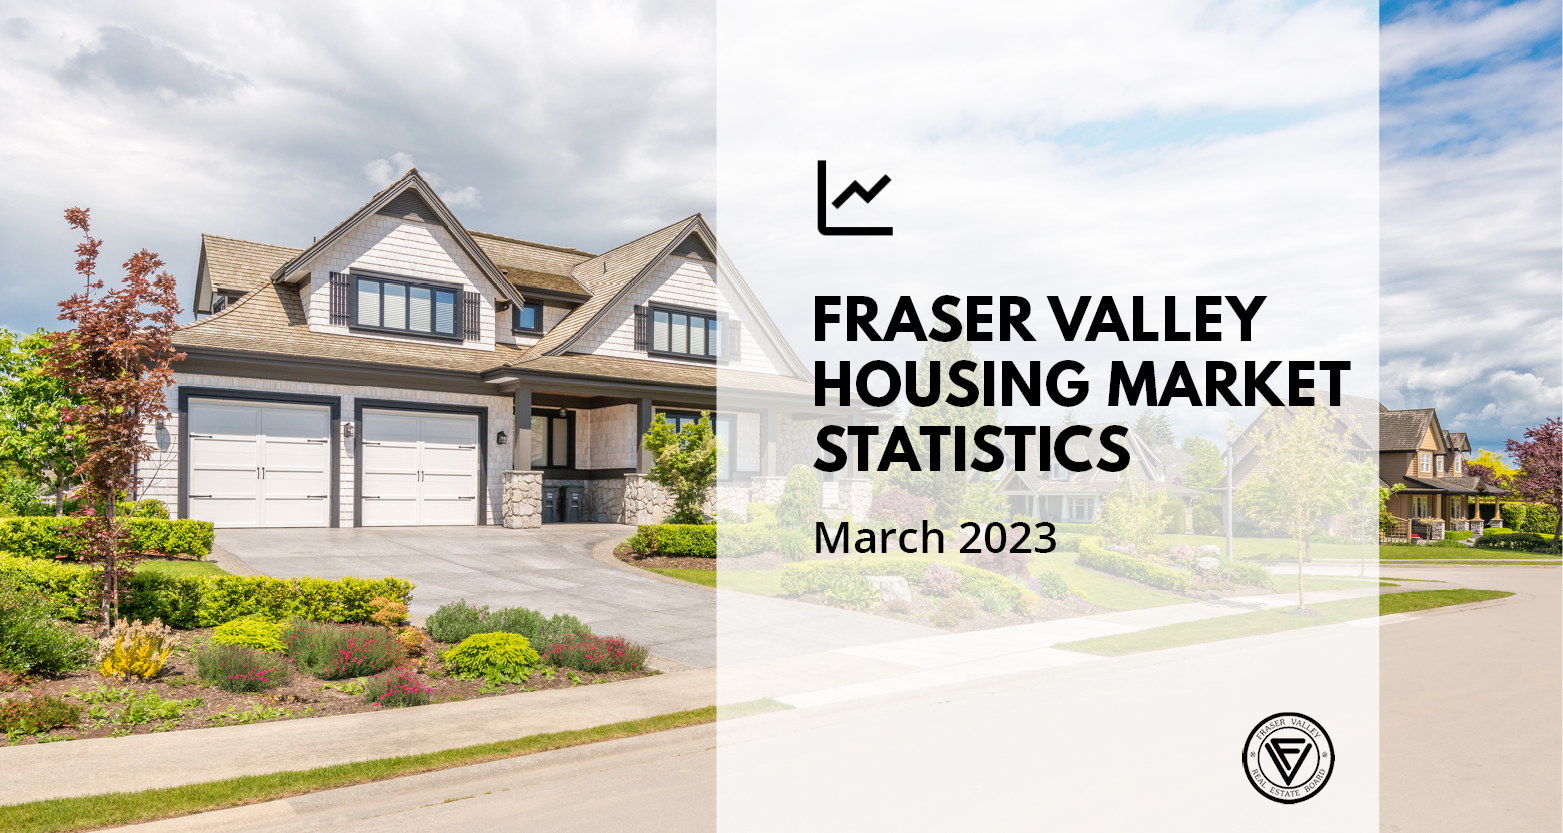 Momentum continues to build in the Fraser Valley real estate market